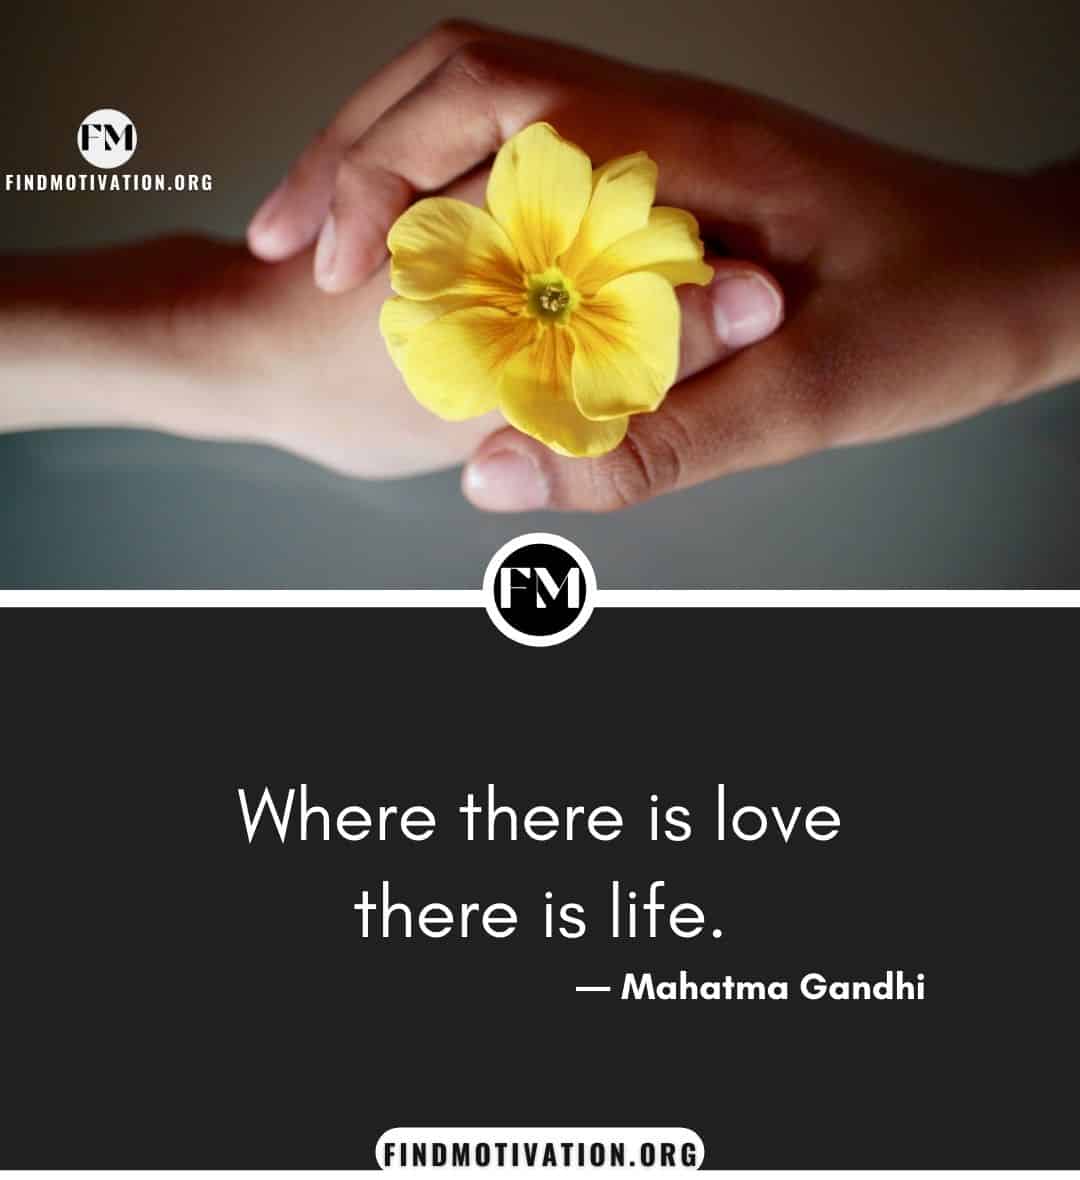 Best inspiring positive quotes about love to spread your love and happiness